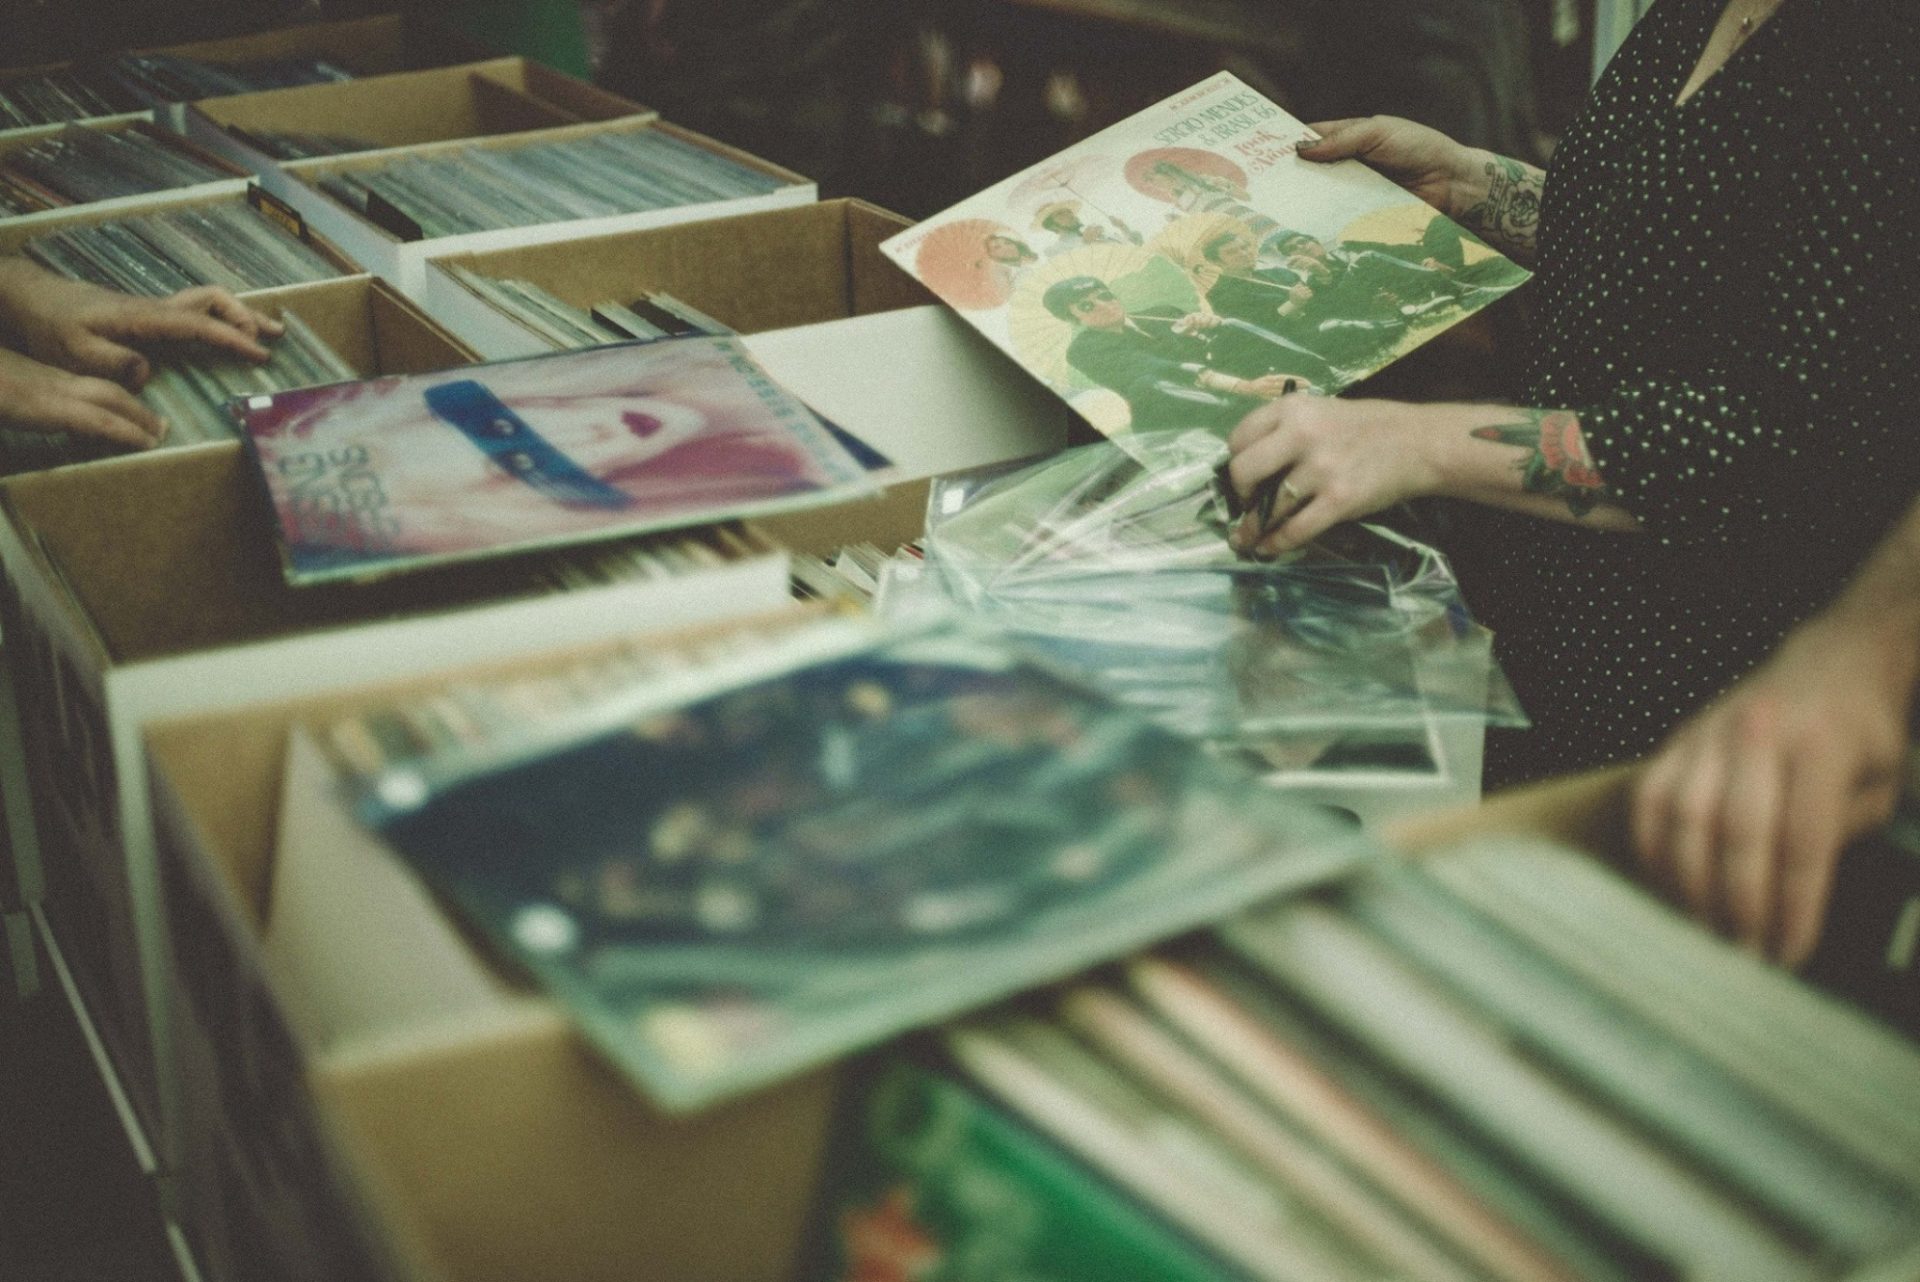 A photo of a person looking intently through records at a record store.